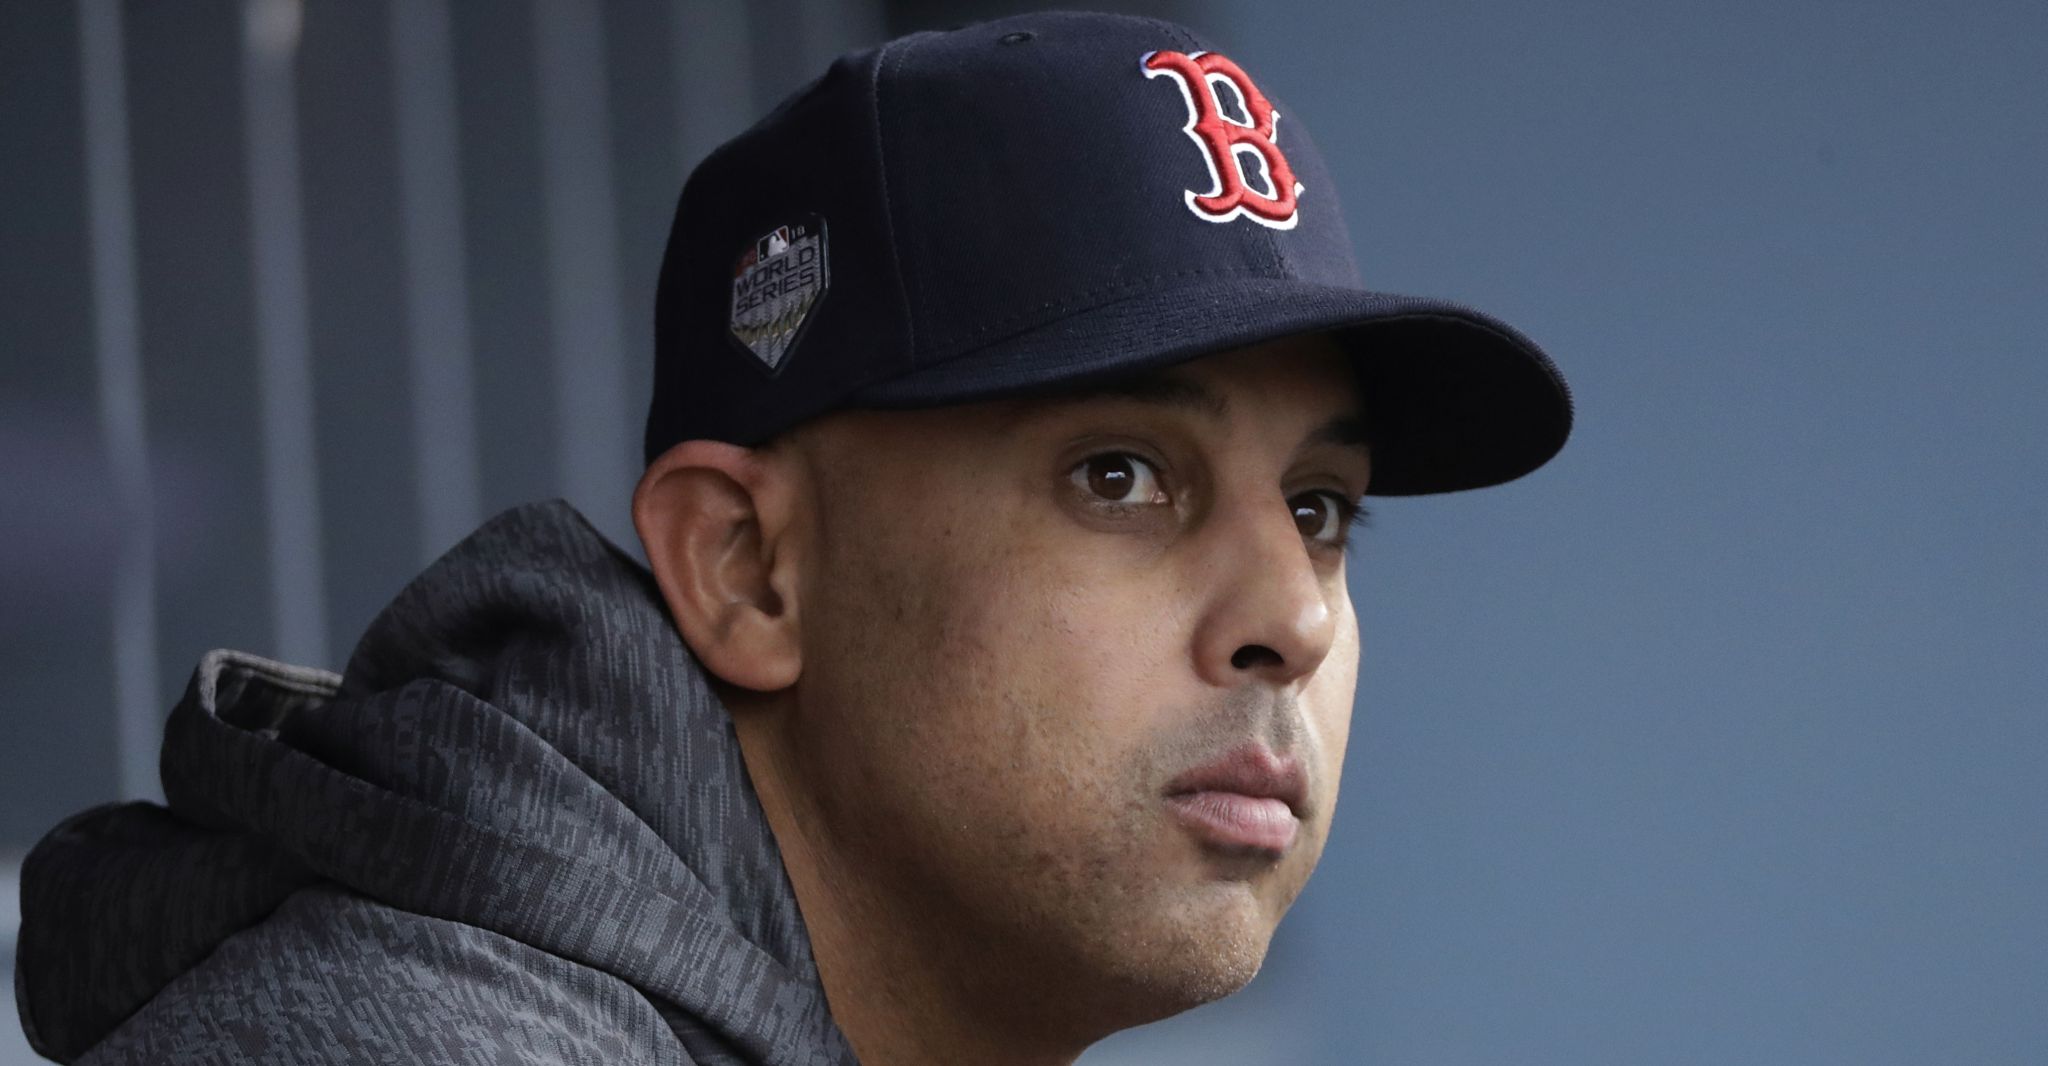 Alex Cora sent meaningful message to Christian Vázquez after World Series